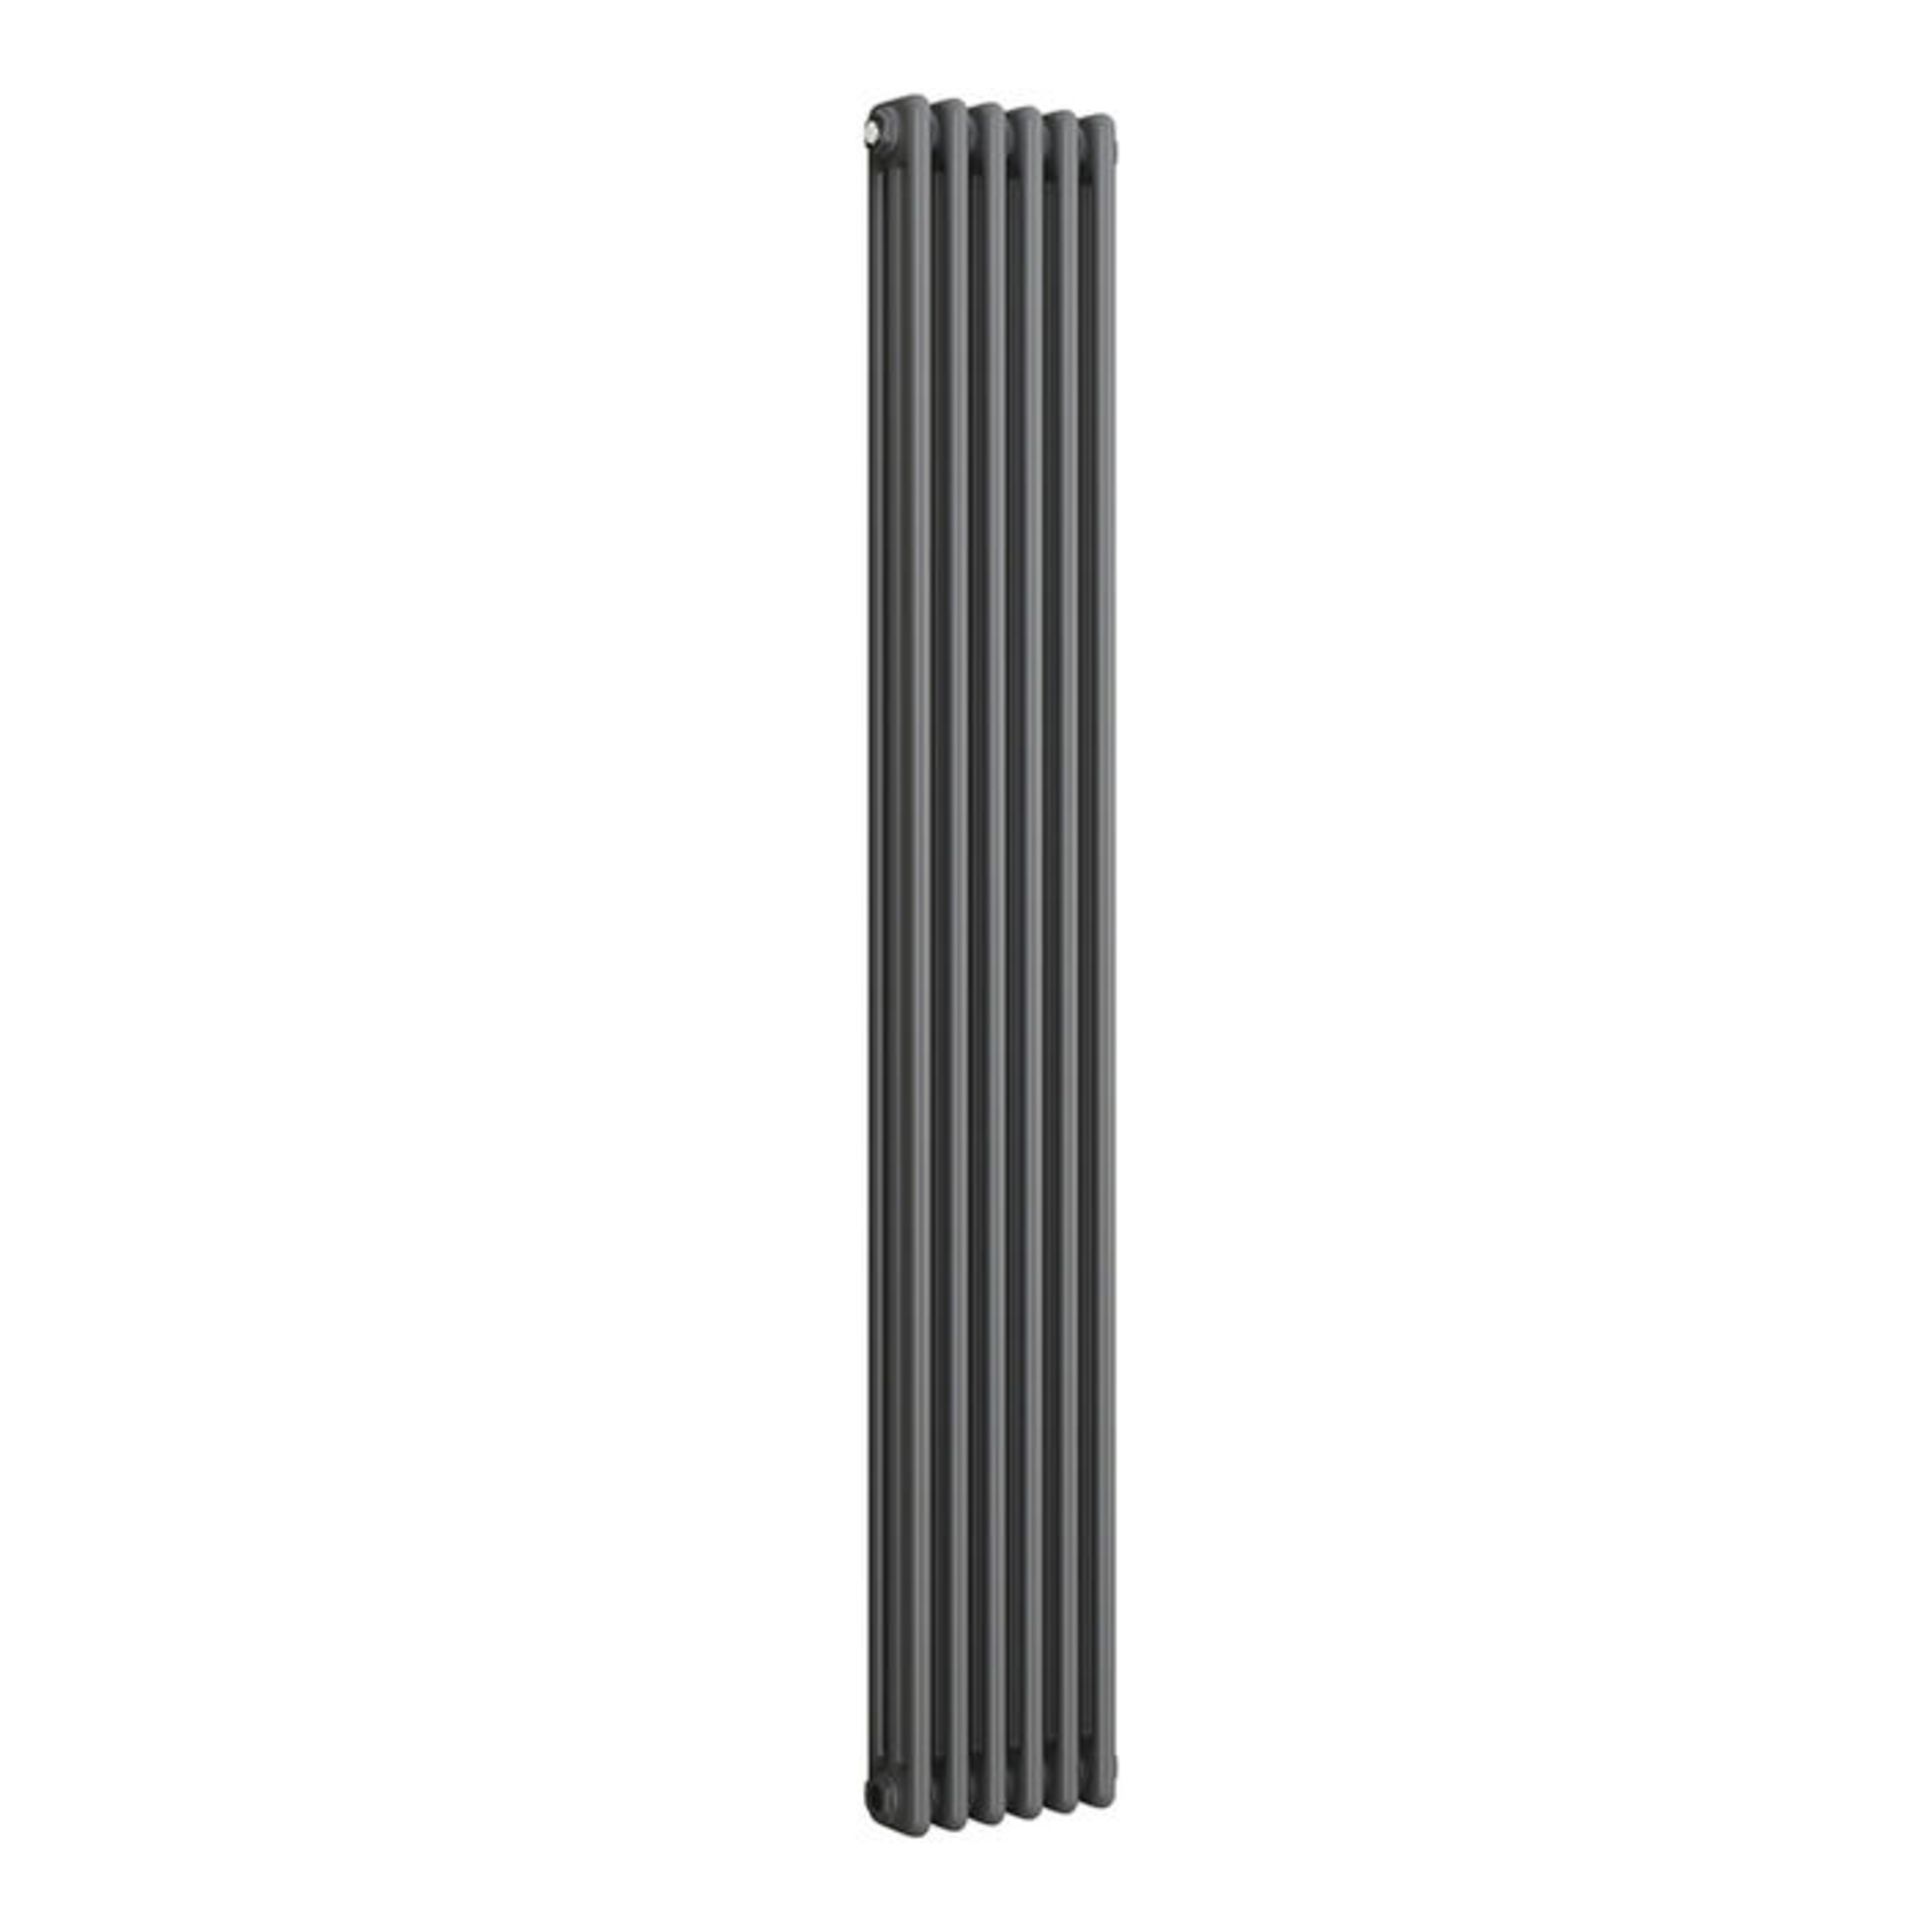 (HS55) 1800x290mm Anthracite Triple Panel Vertical Colosseum Traditional Radiator. RRP £409.99. Made - Image 4 of 4